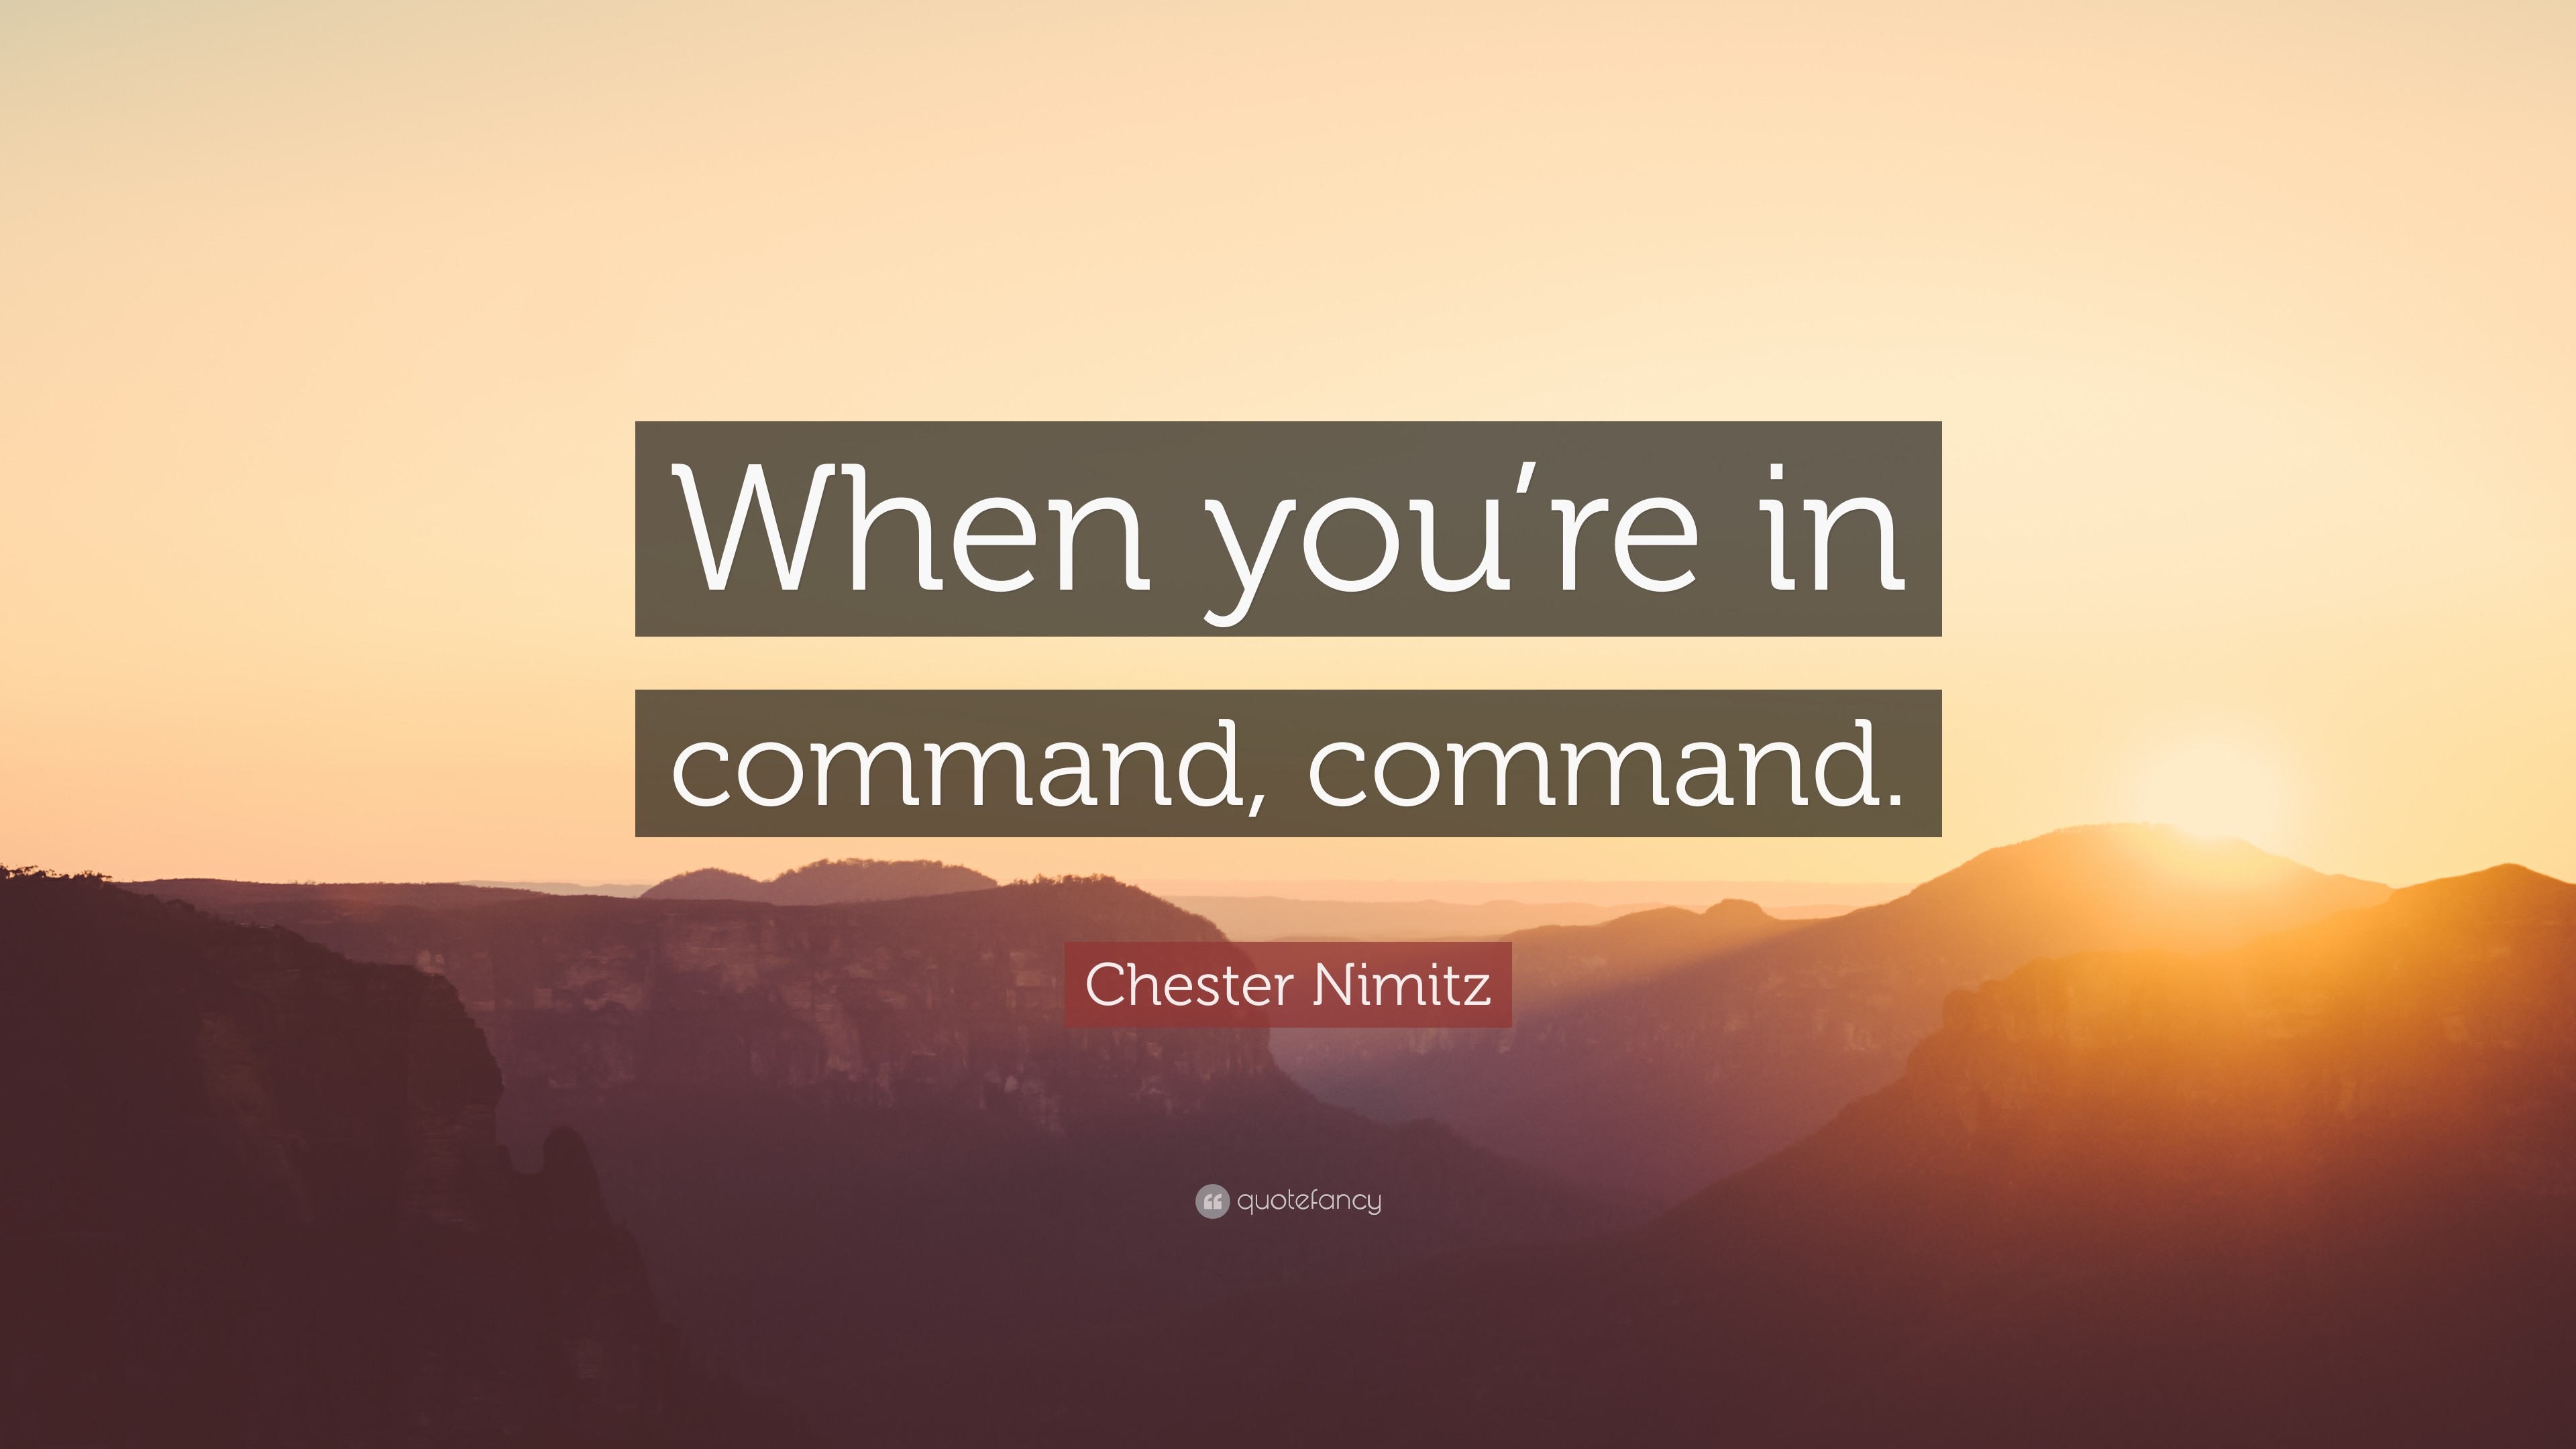 3840x2160 Chester Nimitz Quote: “When you're in command, command.”